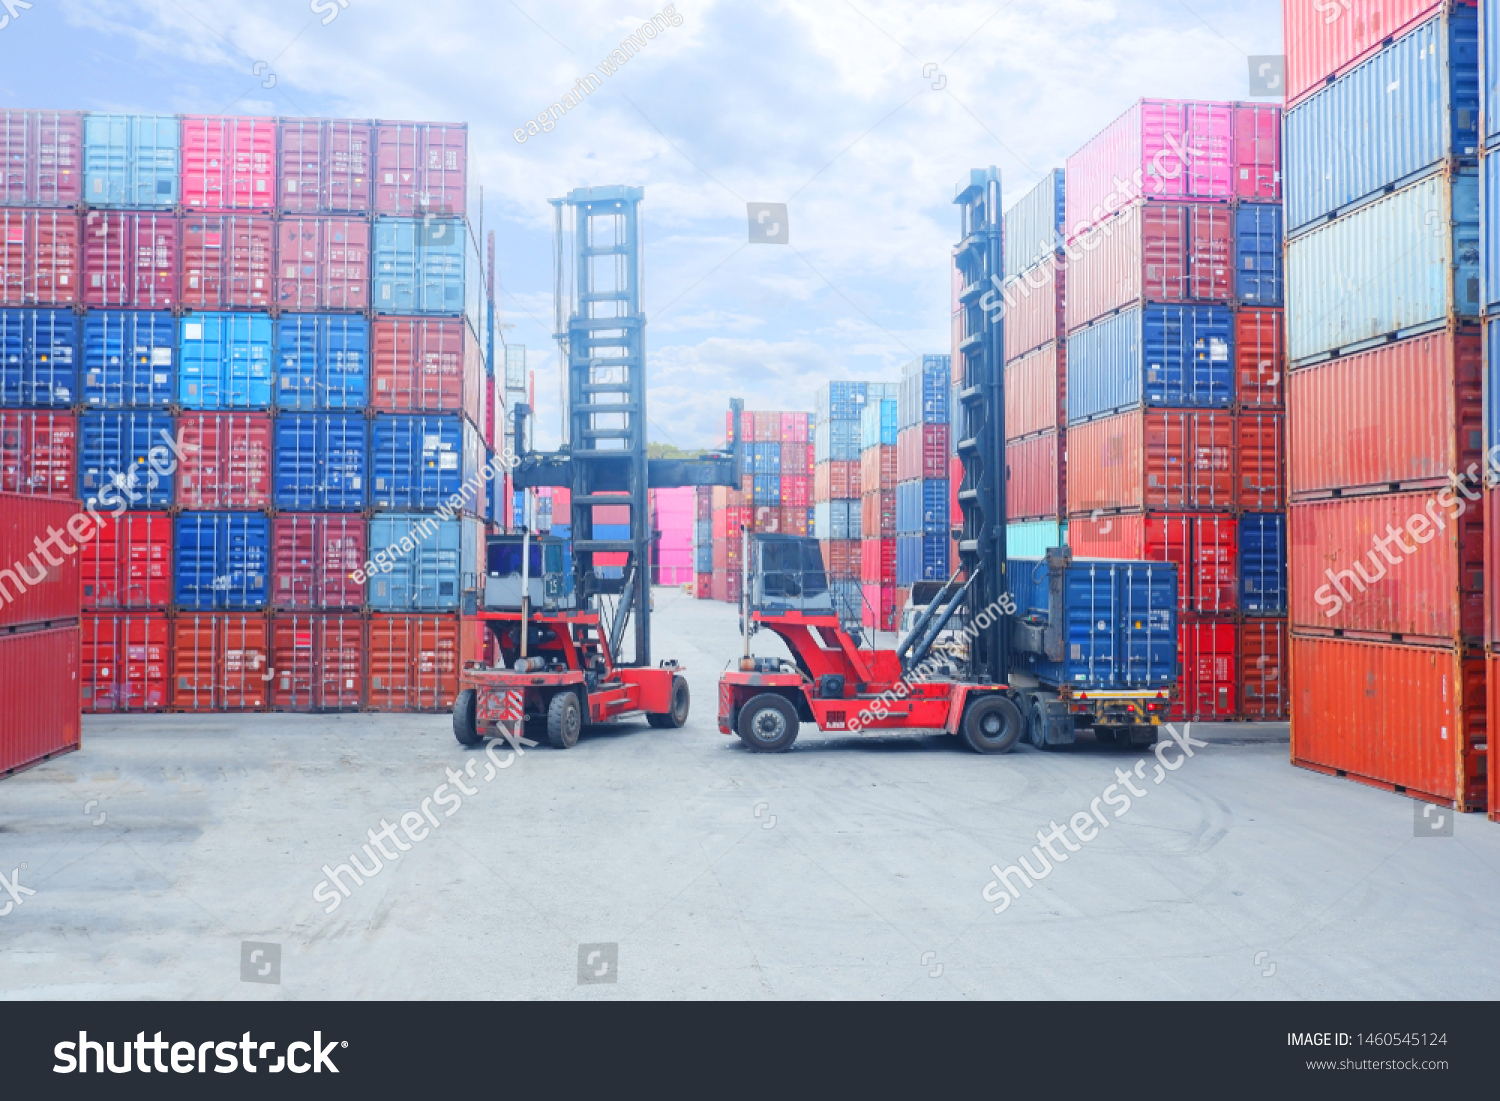 Forklift truck lifting cargo container in shipping yard or dock yard against sunrise sky with cargo container stack in background for transportation import,export and logistic industrial concept #1460545124